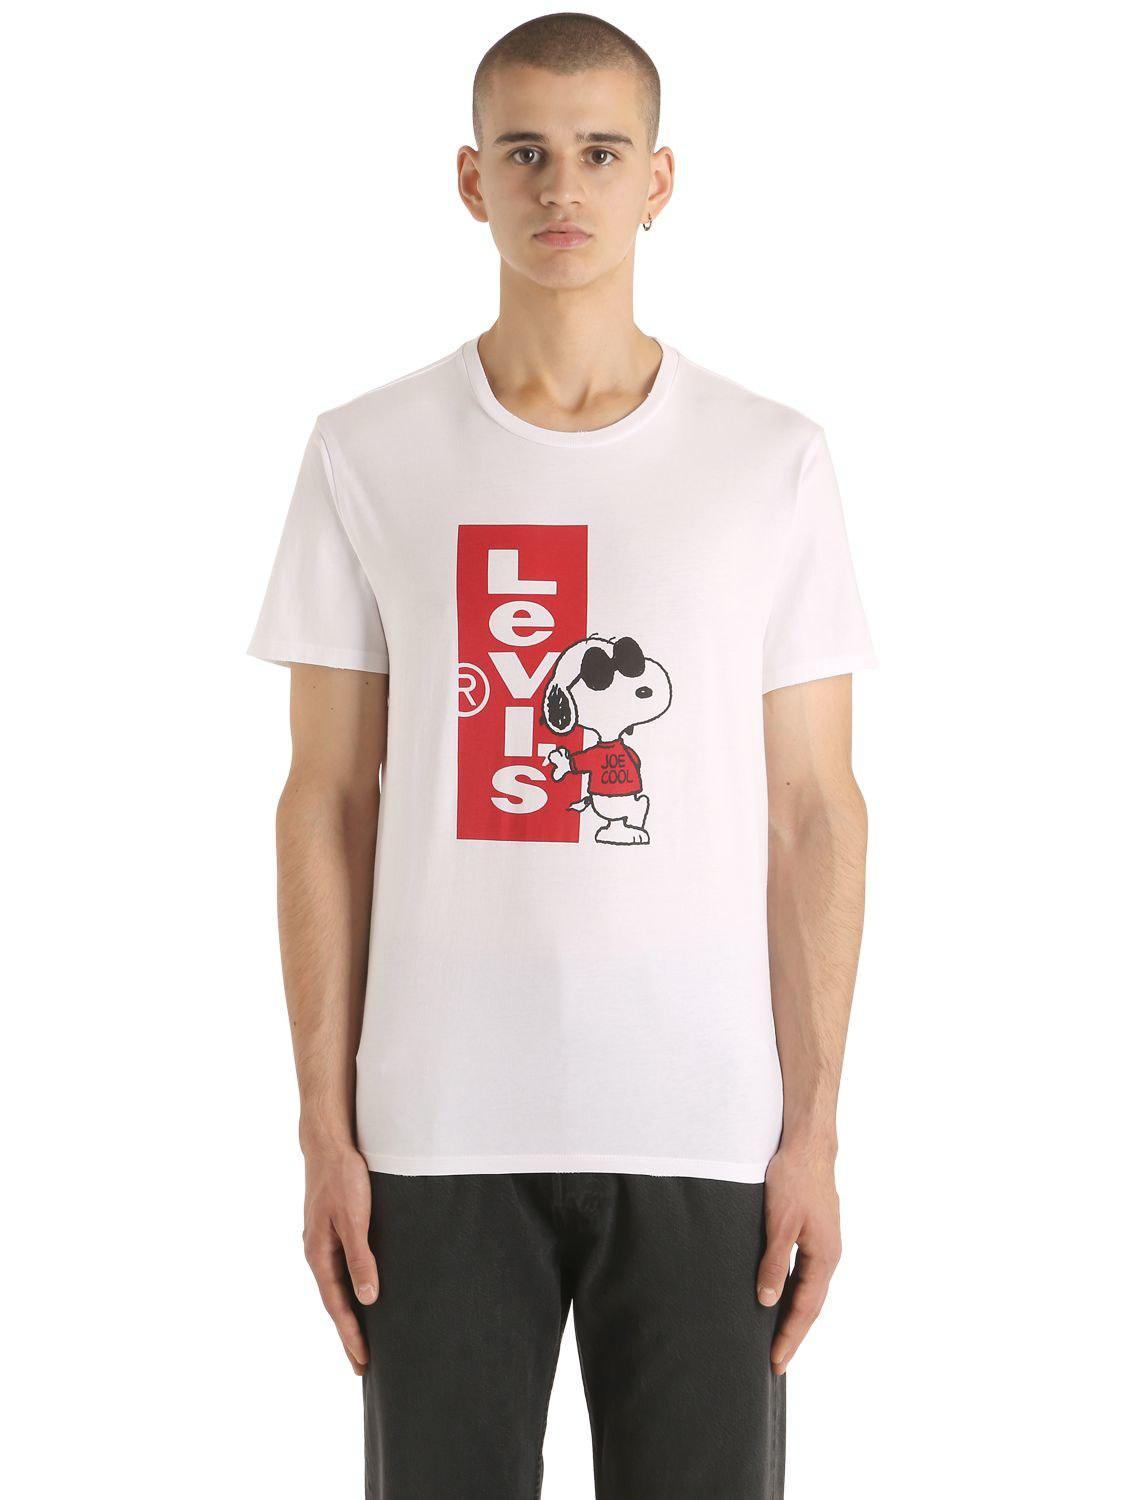 levis t shirt with snoopy